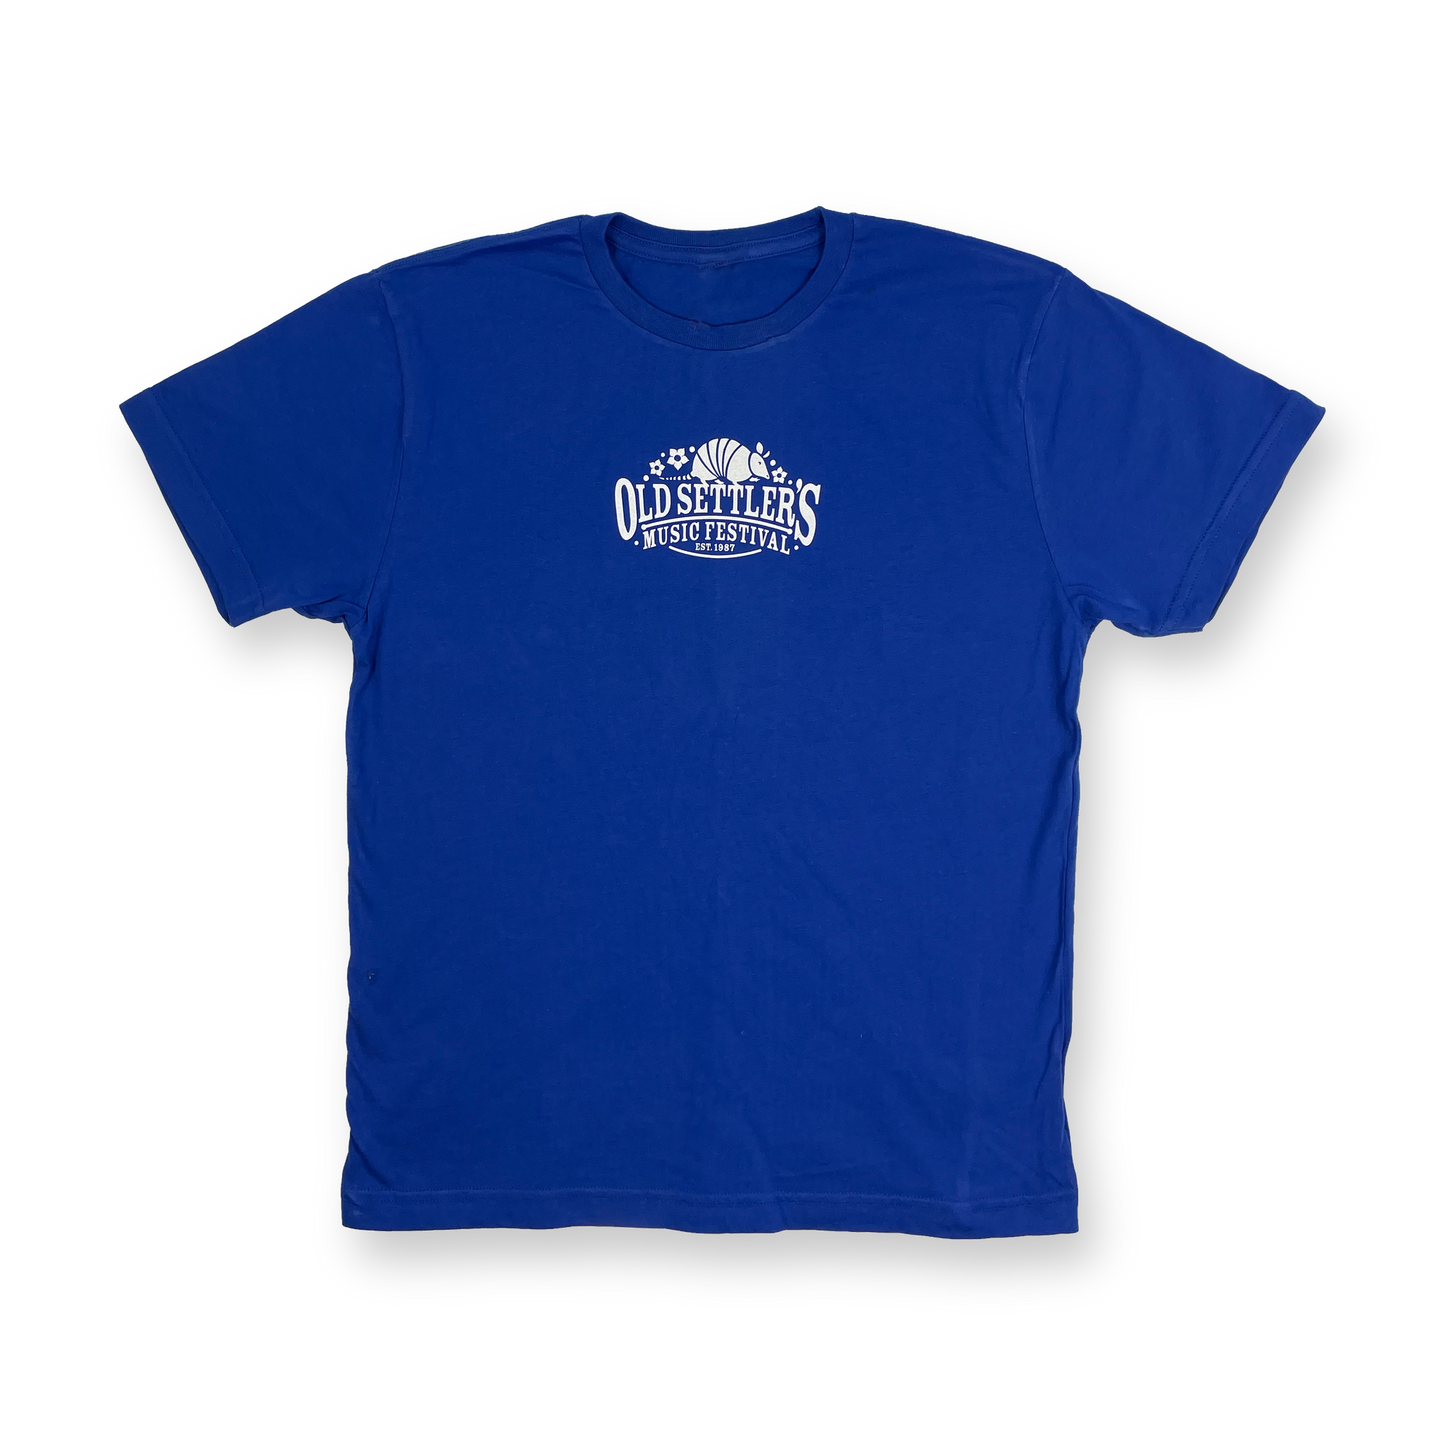 OSMF Royal Blue Tee - Youth